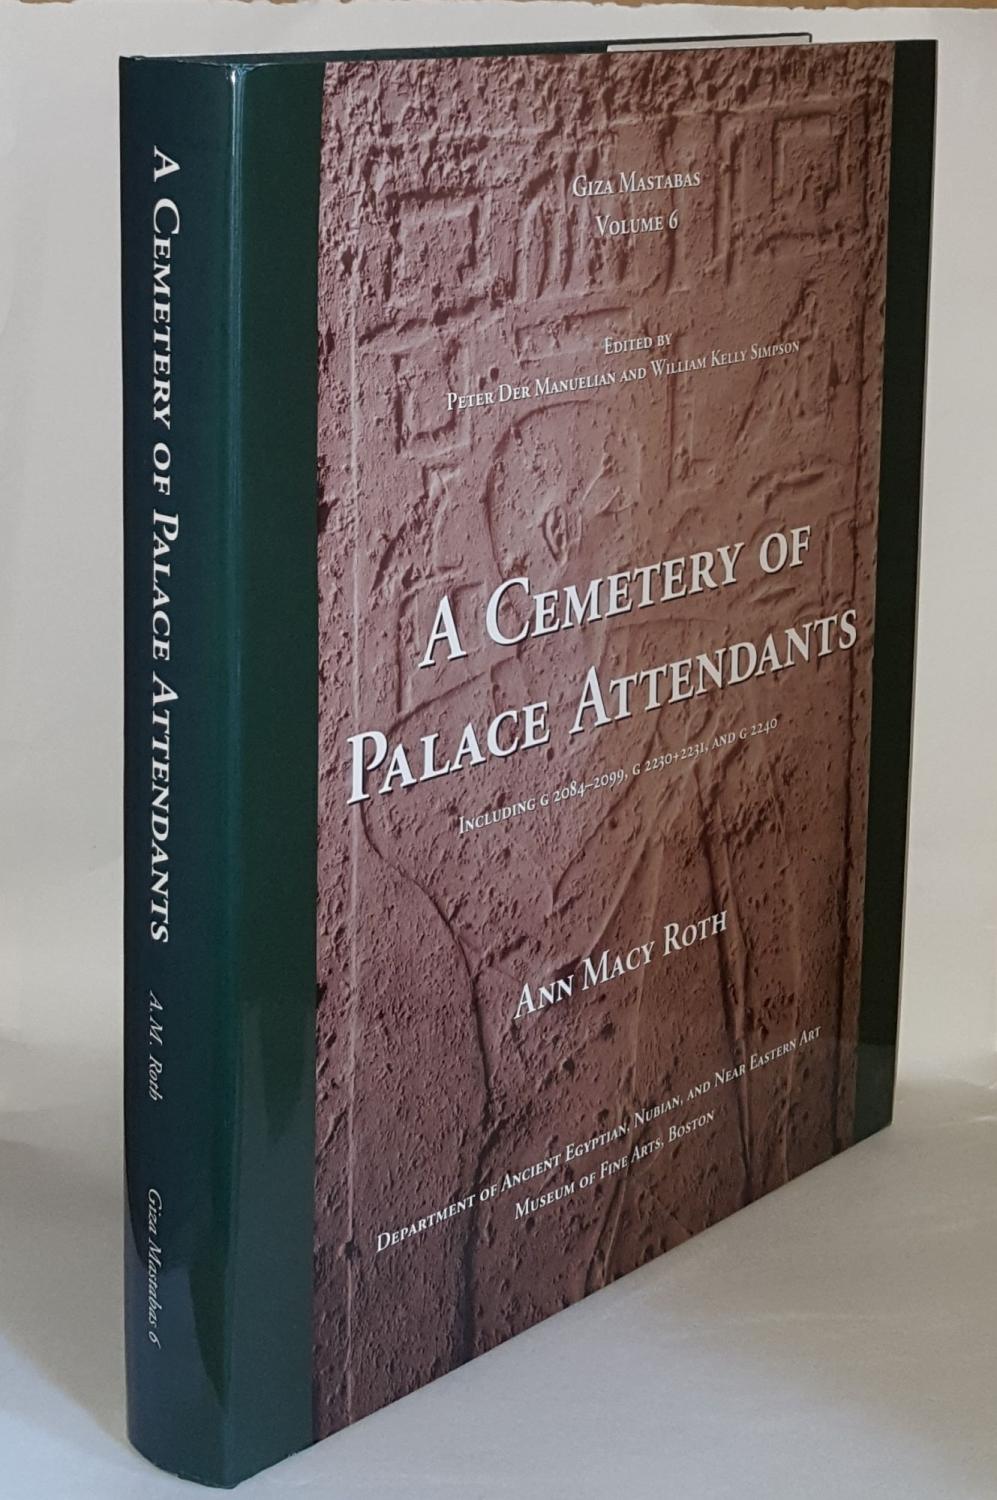 A CEMETERY OF PALACE ATTENDANTS Including G 2084-2099 G 2230+2231 and G 2240 Giza Mastabas Volume 6 - ROTH Ann Macy, DER MANUELIAN Peter; SIMPSON William Kelly